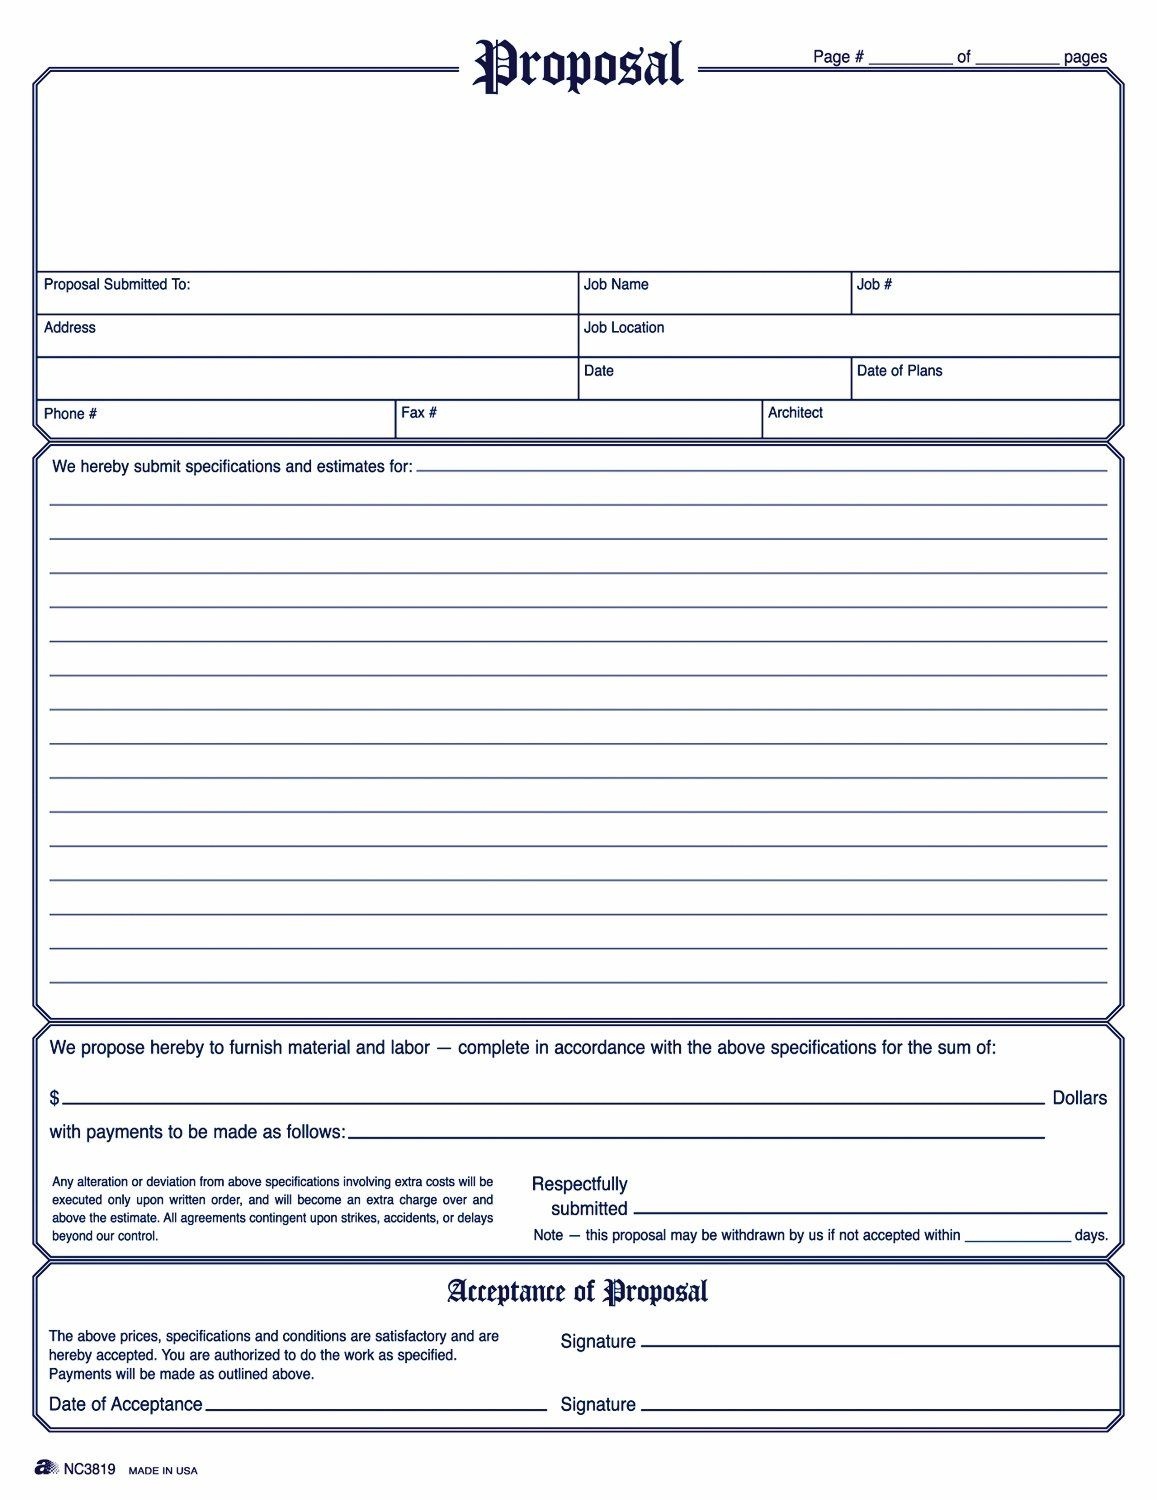 Image Result For General Contractor Forms Templates | Job Proprosals - Free Printable Proposal Forms